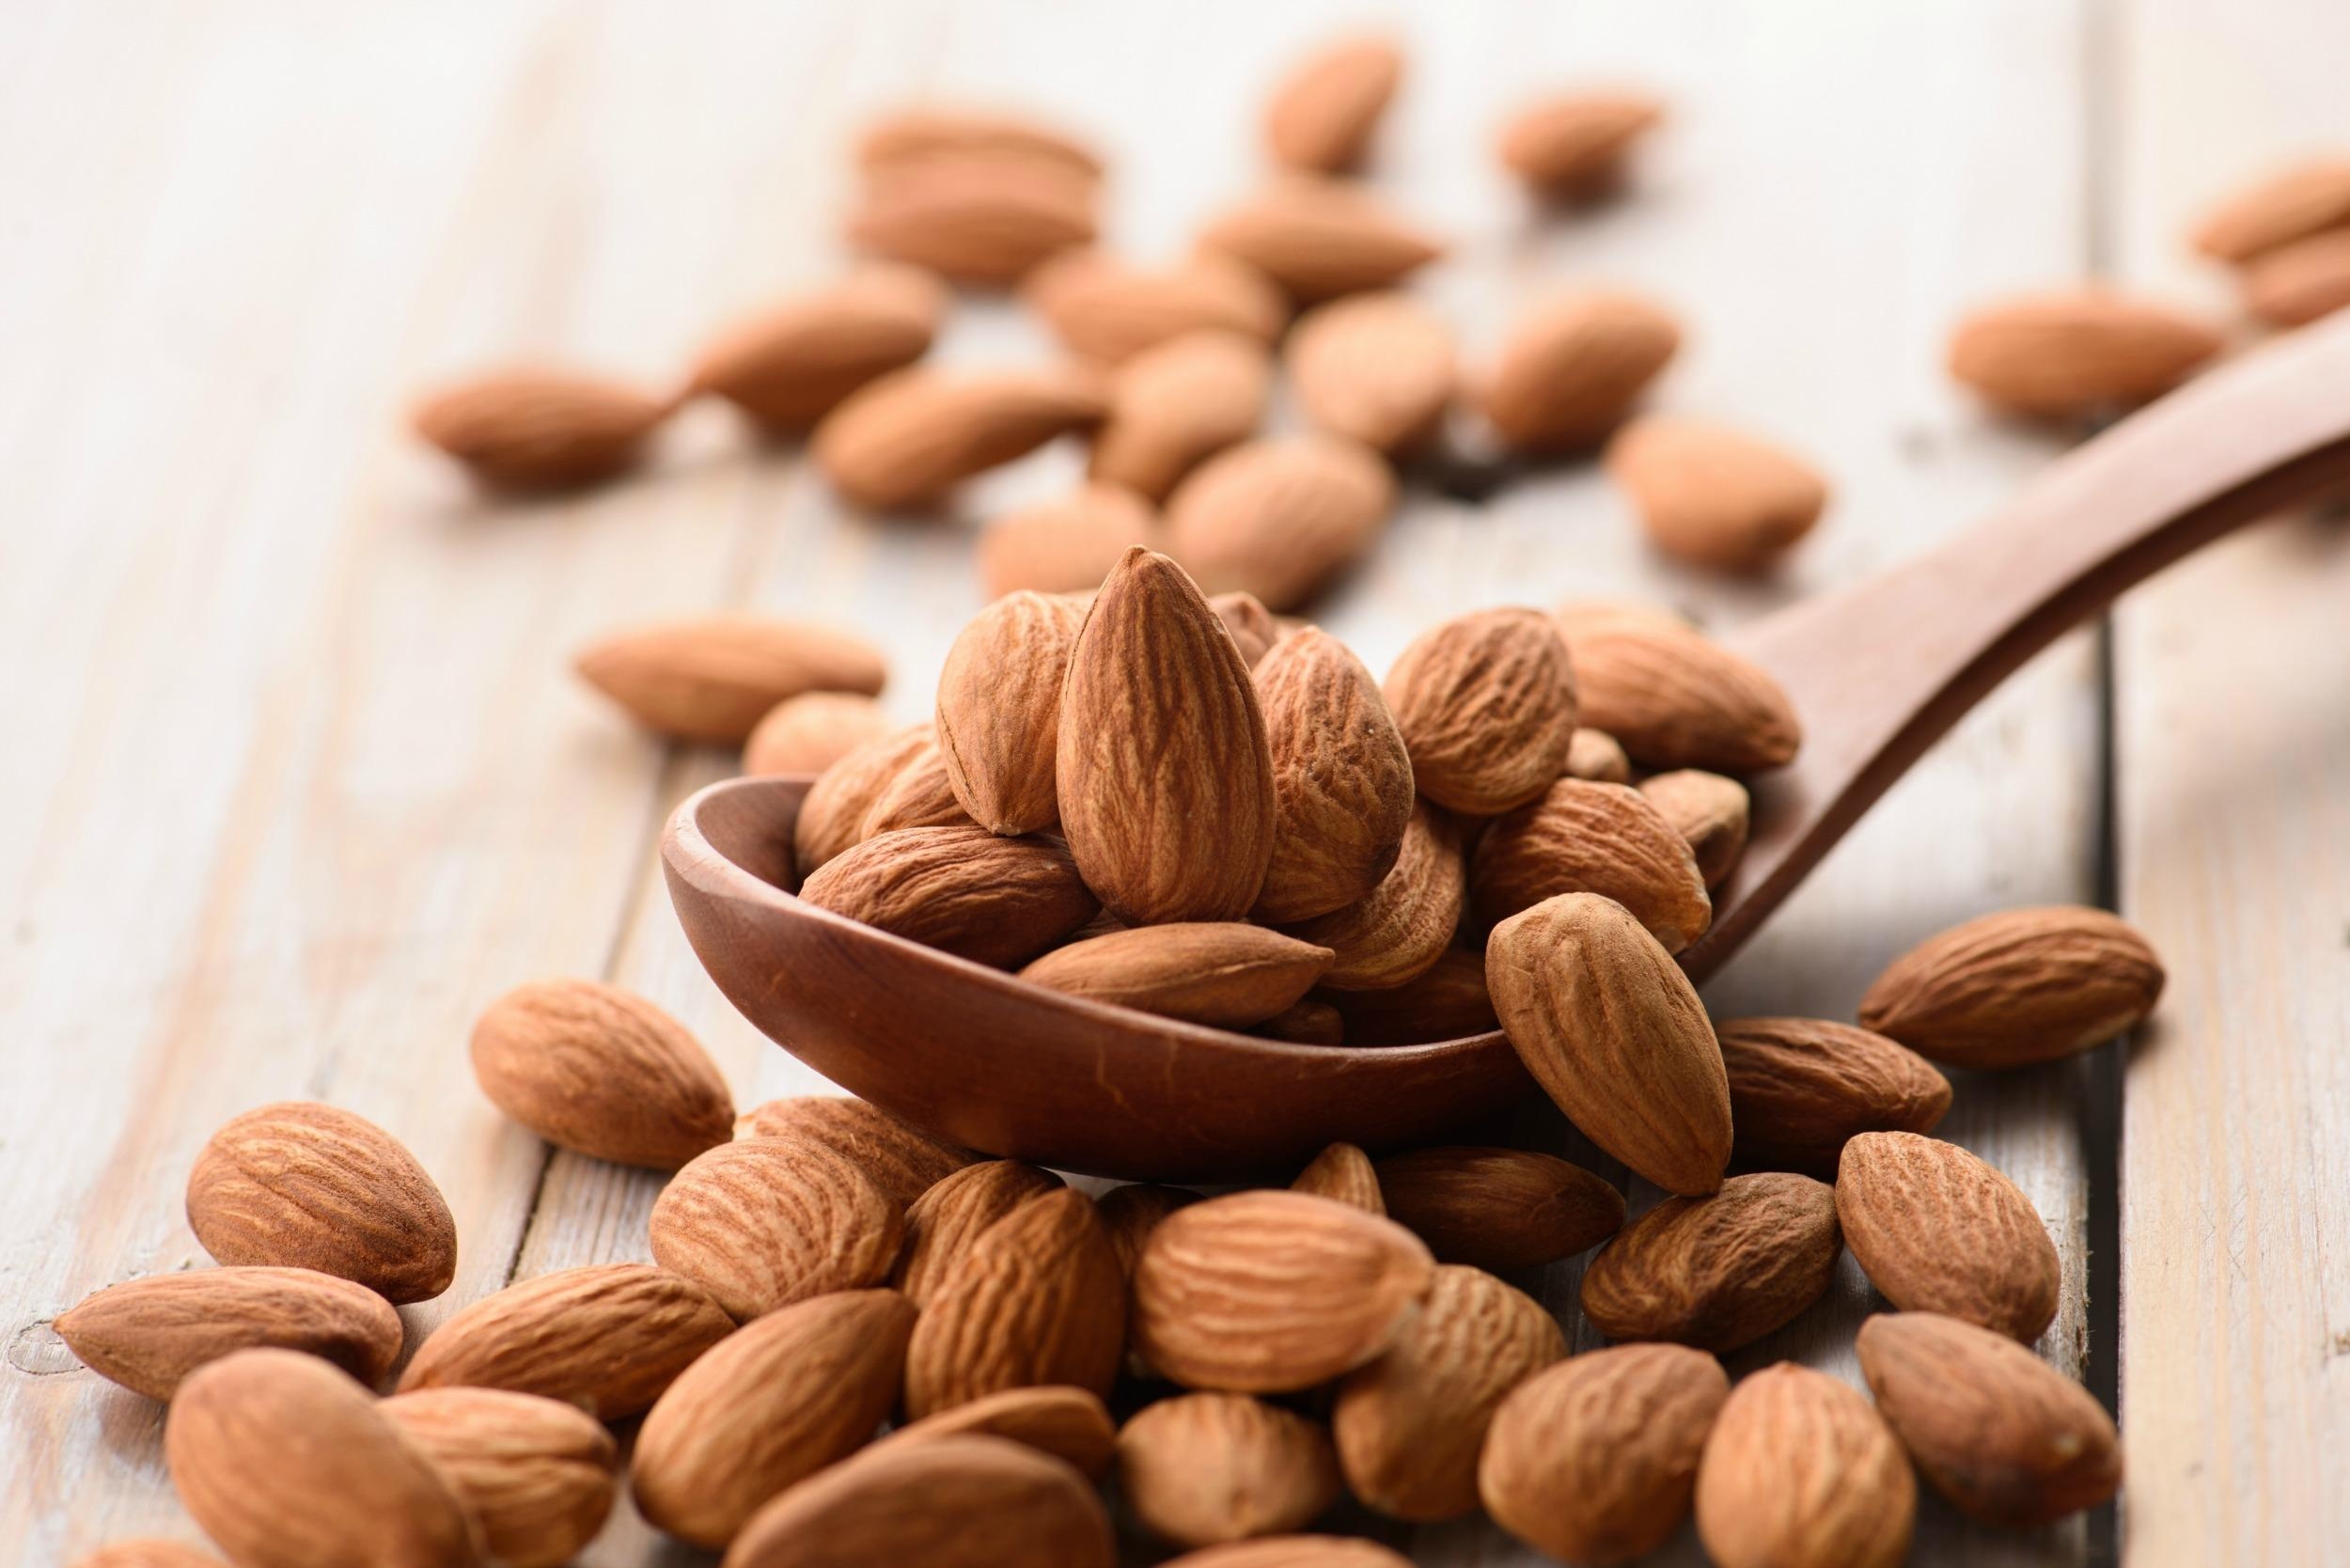 Almonds: A seed of a nut tree native to the Mediterranean region, Highly nutritious and filled with fats. 2500x1670 HD Wallpaper.